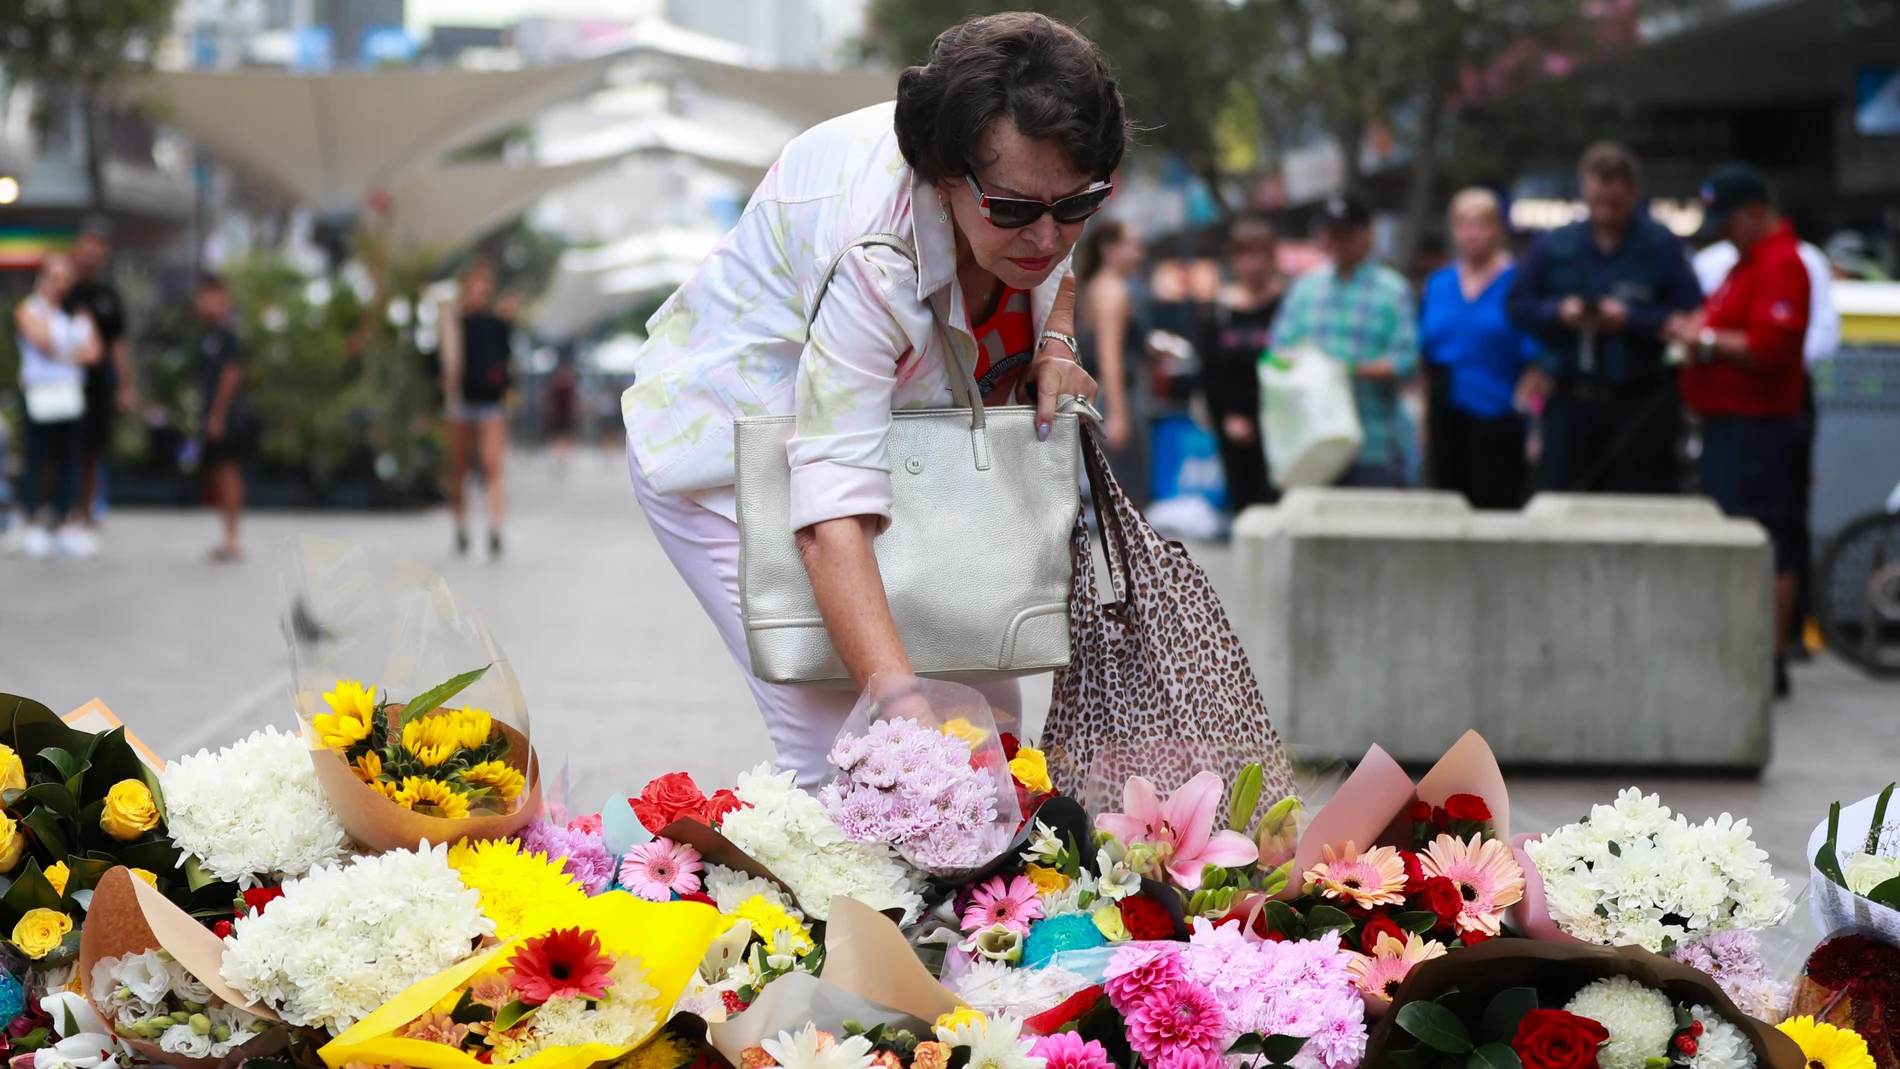 SYDNEY, April 14, 2024 -- A woman lays flowers outside the Westfield Shopping Centre at Bondi Junction in Sydney, Australia, April 14, 2024. Australian police on Sunday identified the perpetrator of a Sydney shopping centre stabbing that killed six people, saying no intelligence would suggest the attack was driven by ideology. The offender in the Saturday afternoon attack at Westfield Shopping Centre at Bondi Junction was 40-year-old Joel Cauchi from Queensland, New South Wales (NSW) Poli...